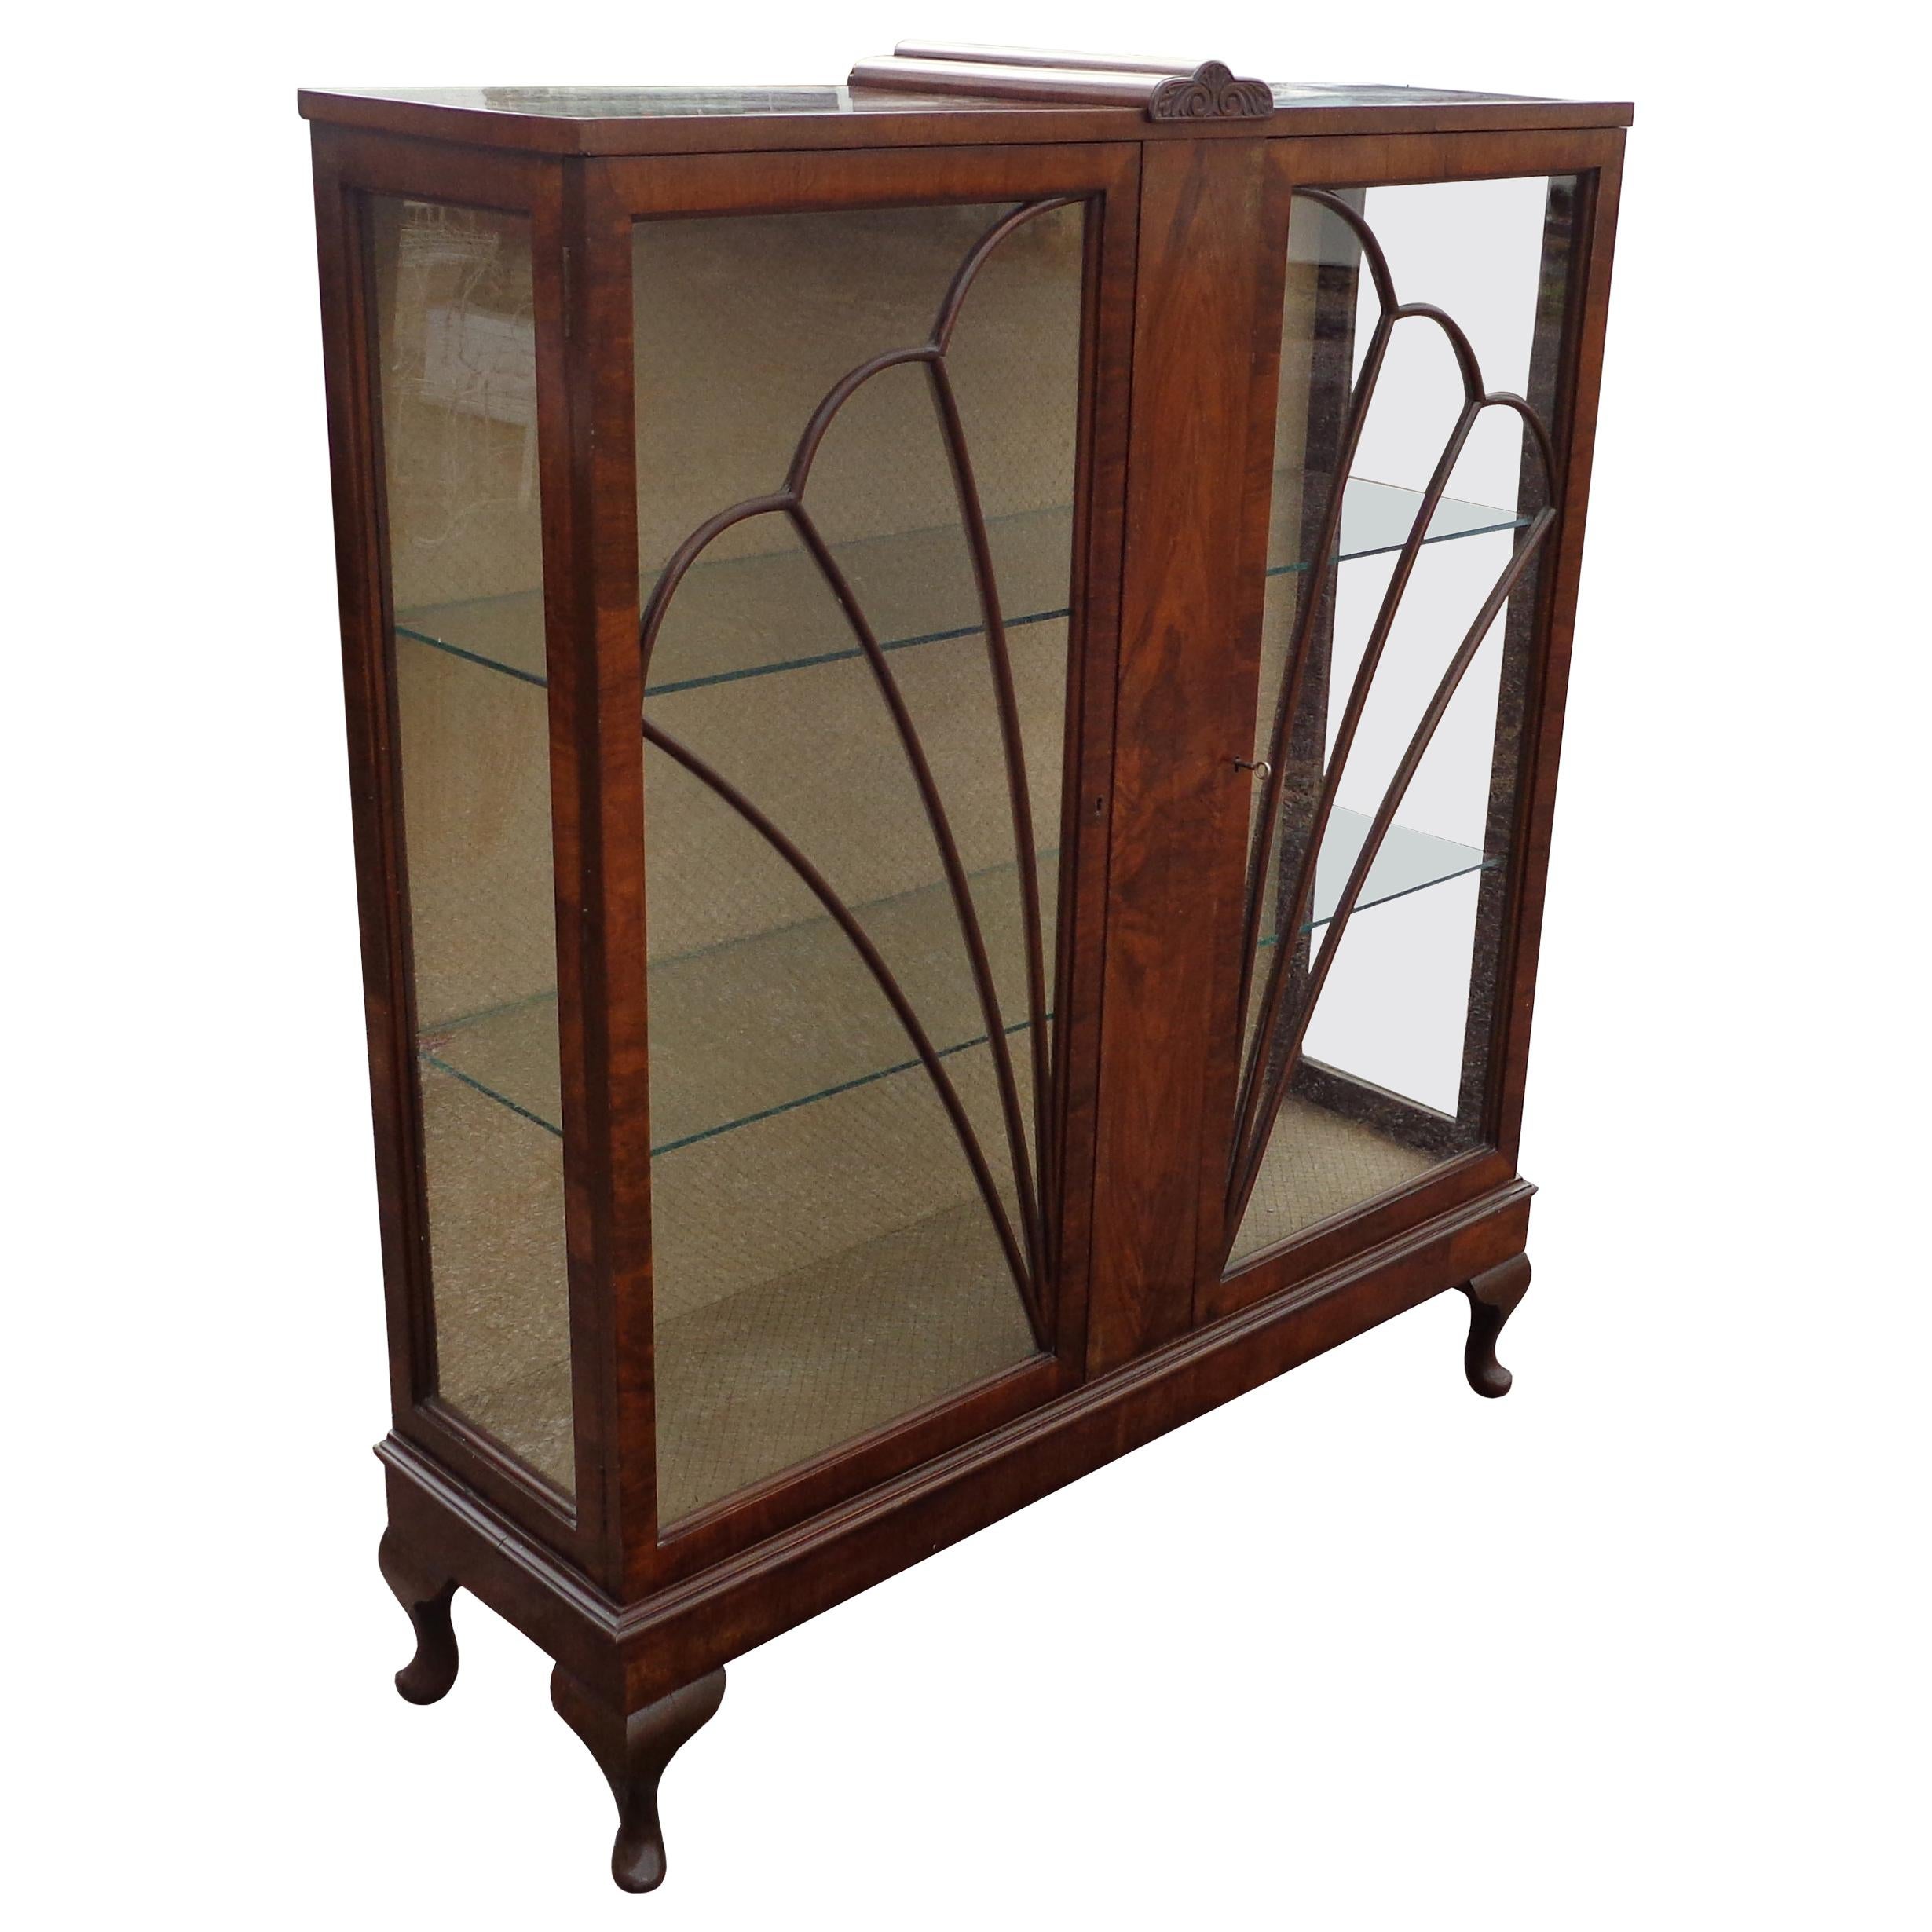 Queen Anne Style Art Deco Glass Display Bookcase